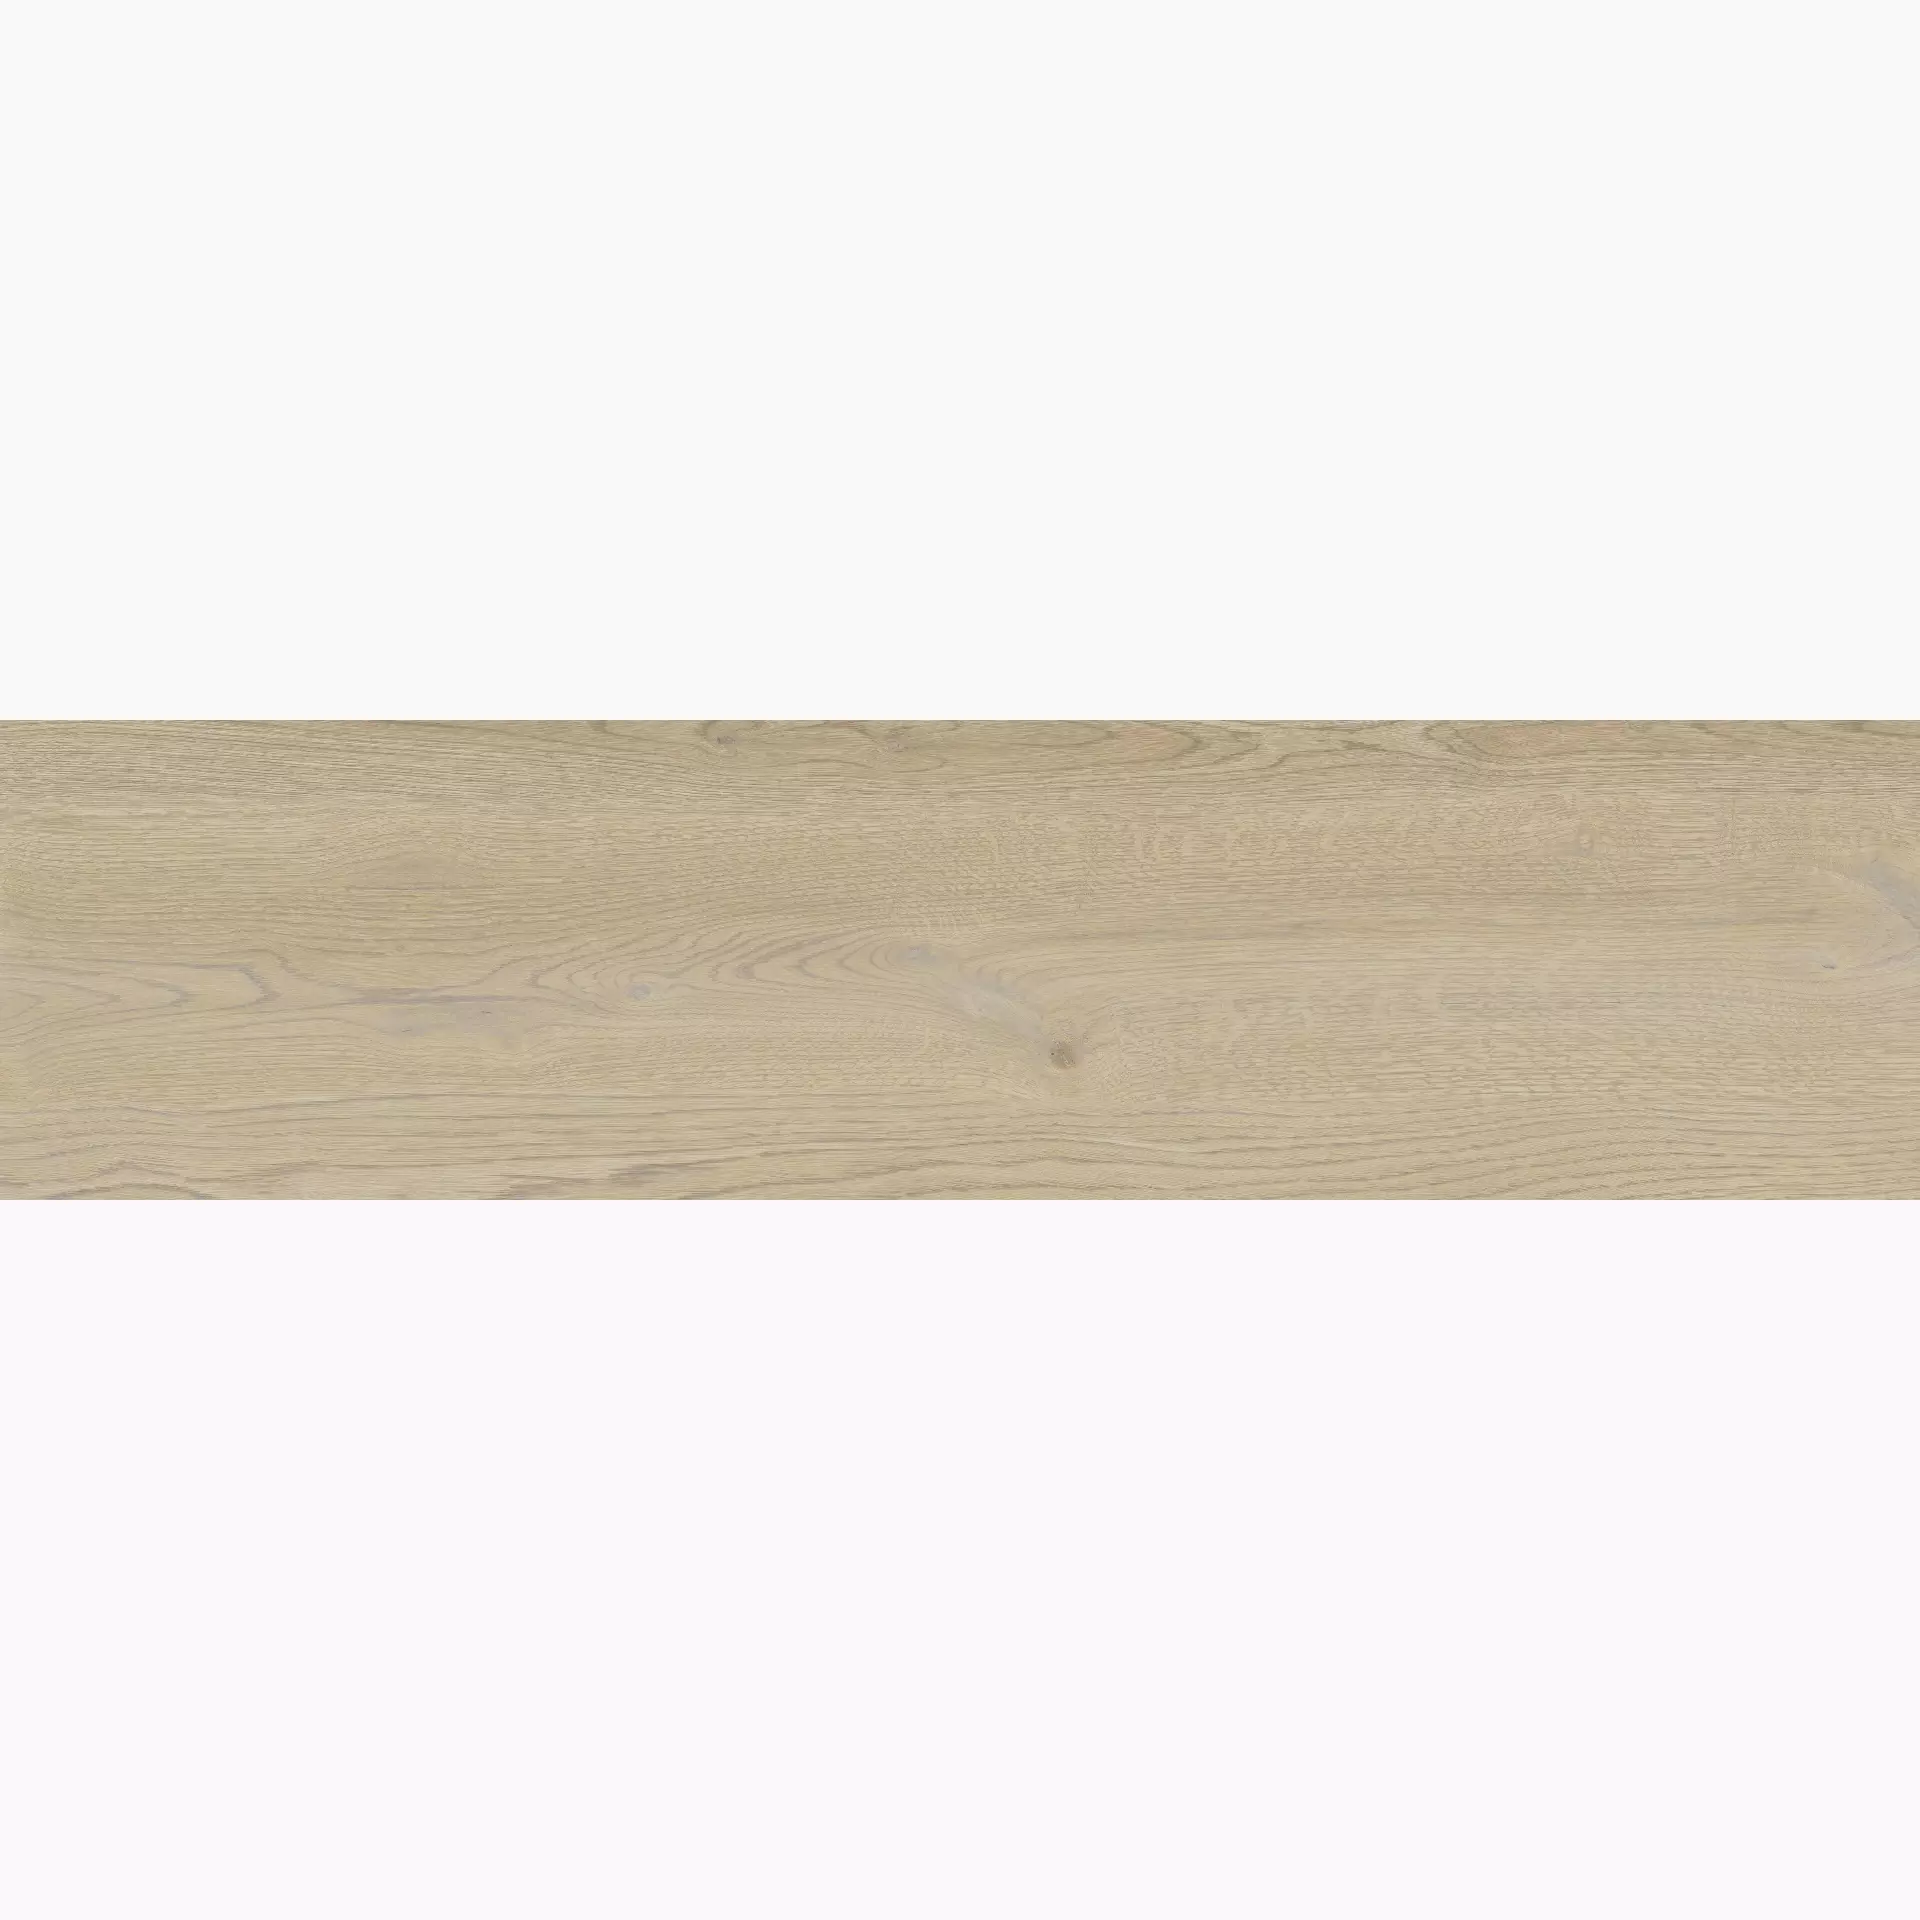 ABK Poetry Wood Gold Naturale PF60010336 30x120cm rectified 8,5mm